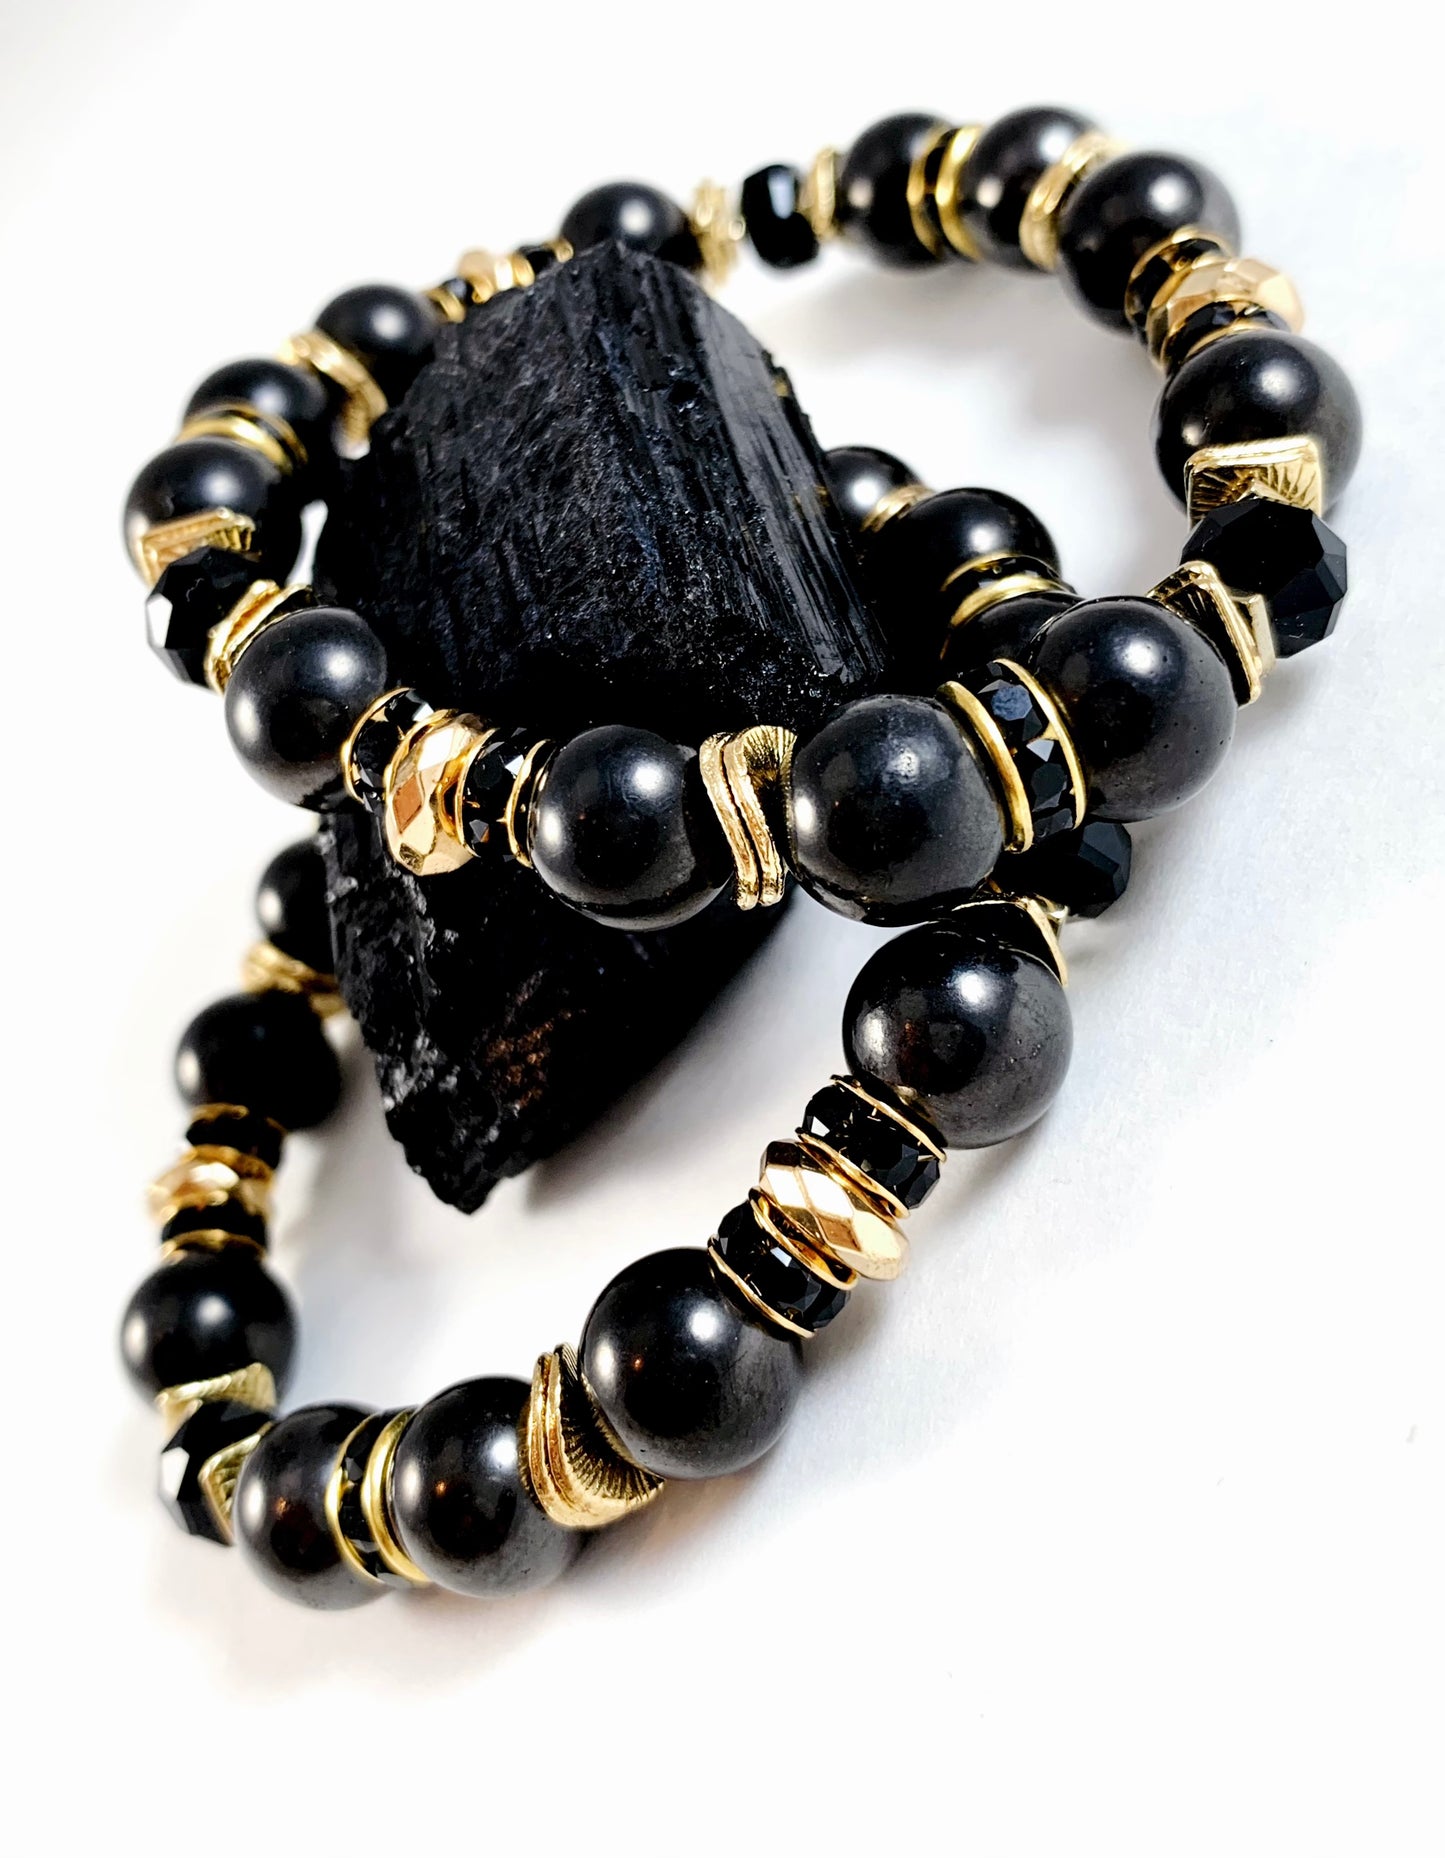 Shimmer with Shungite